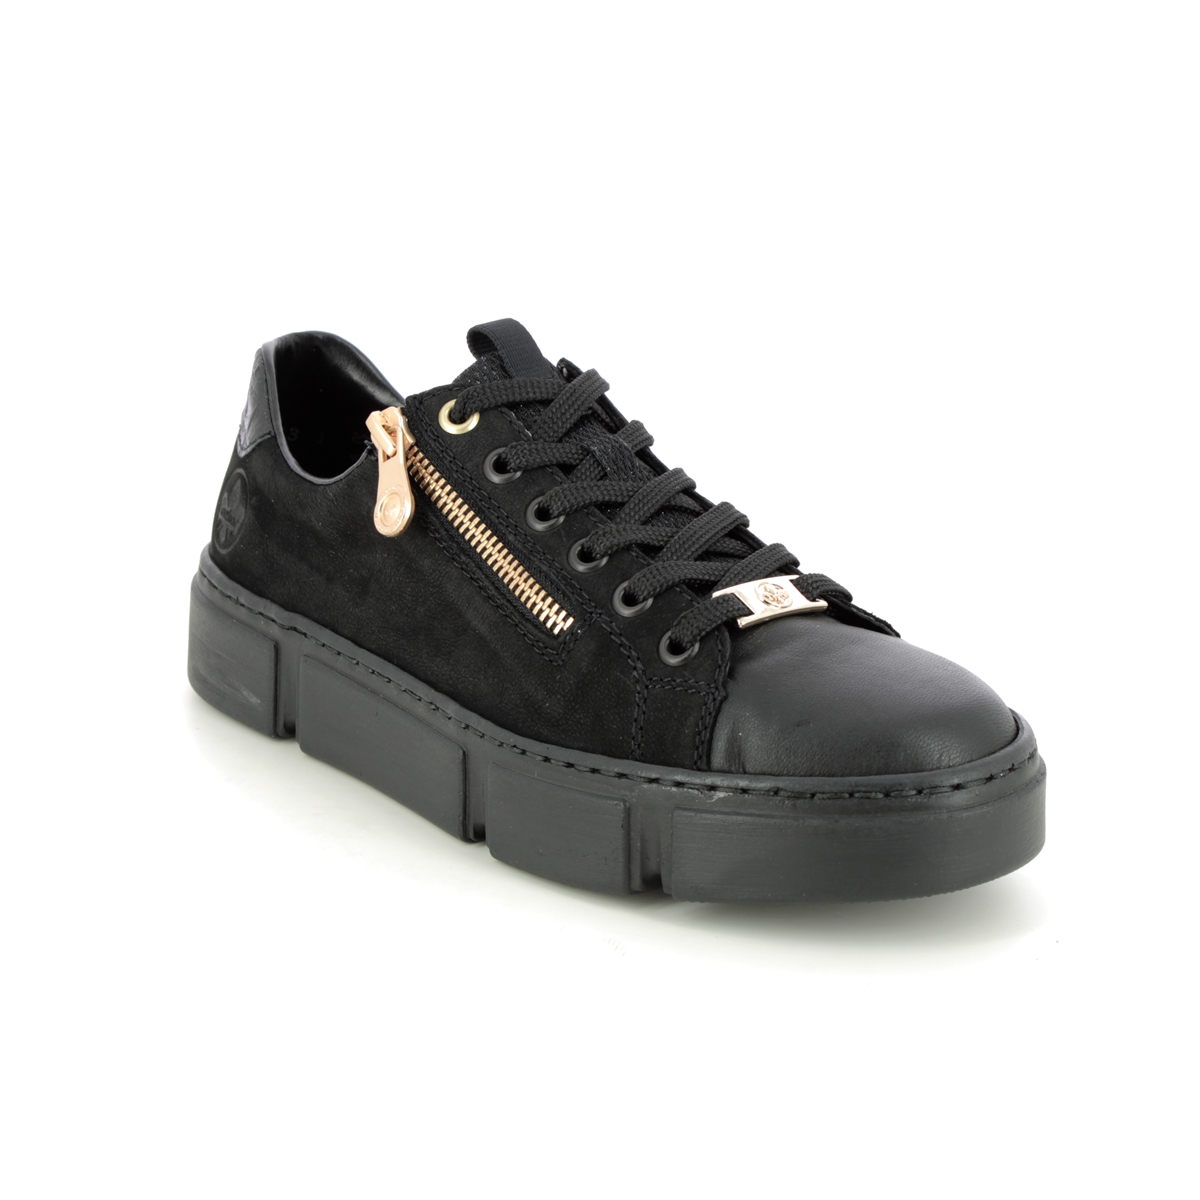 Rieker Hagenz Black Leather Womens Trainers N5932-00 In Size 41 In Plain Black Leather